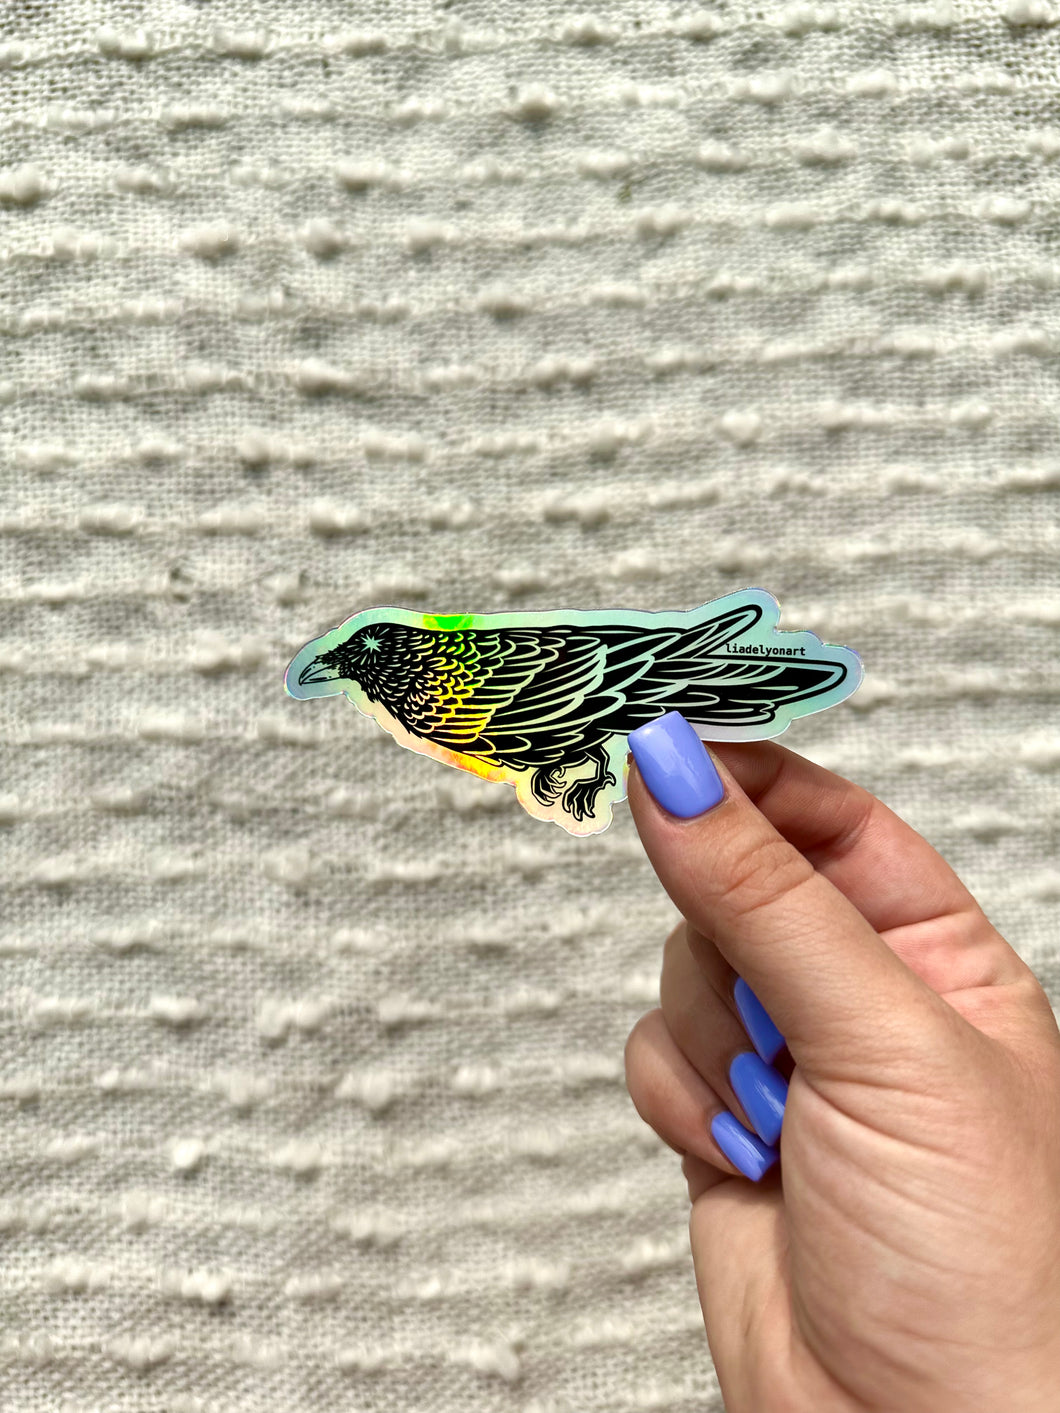 Starry Raven Holographic sticker, 2.6x3in.